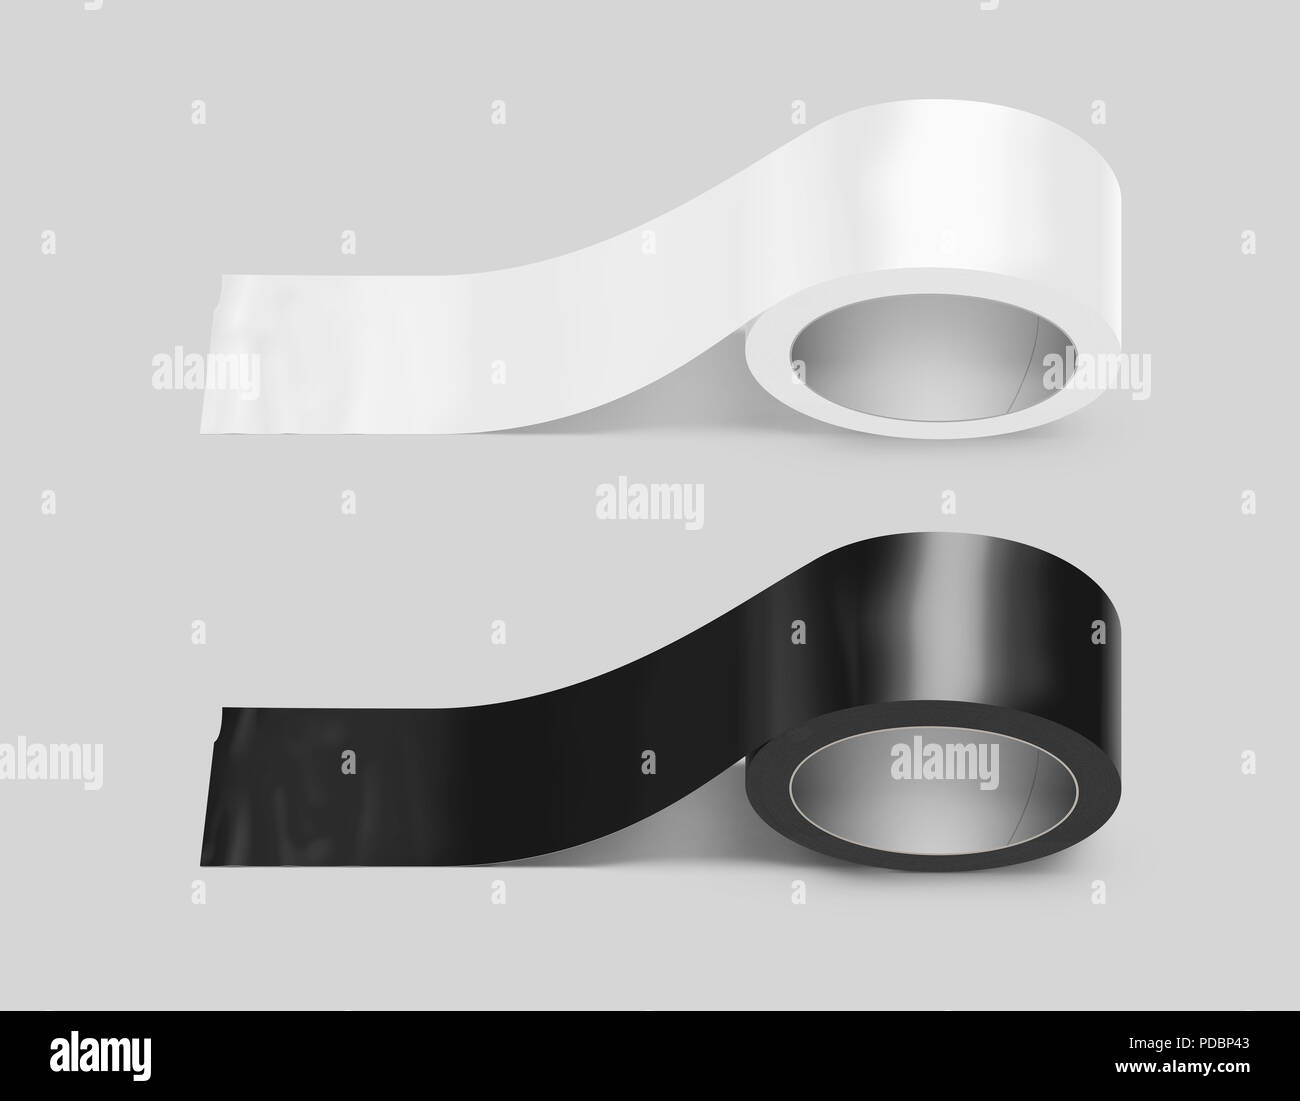 Blank white and black duct adhesive tape mockup, clipping path, 3d illustration. Sticky scotch roll design mock up. Clear glue tape template. Packing insulating tape display. Stock Photo